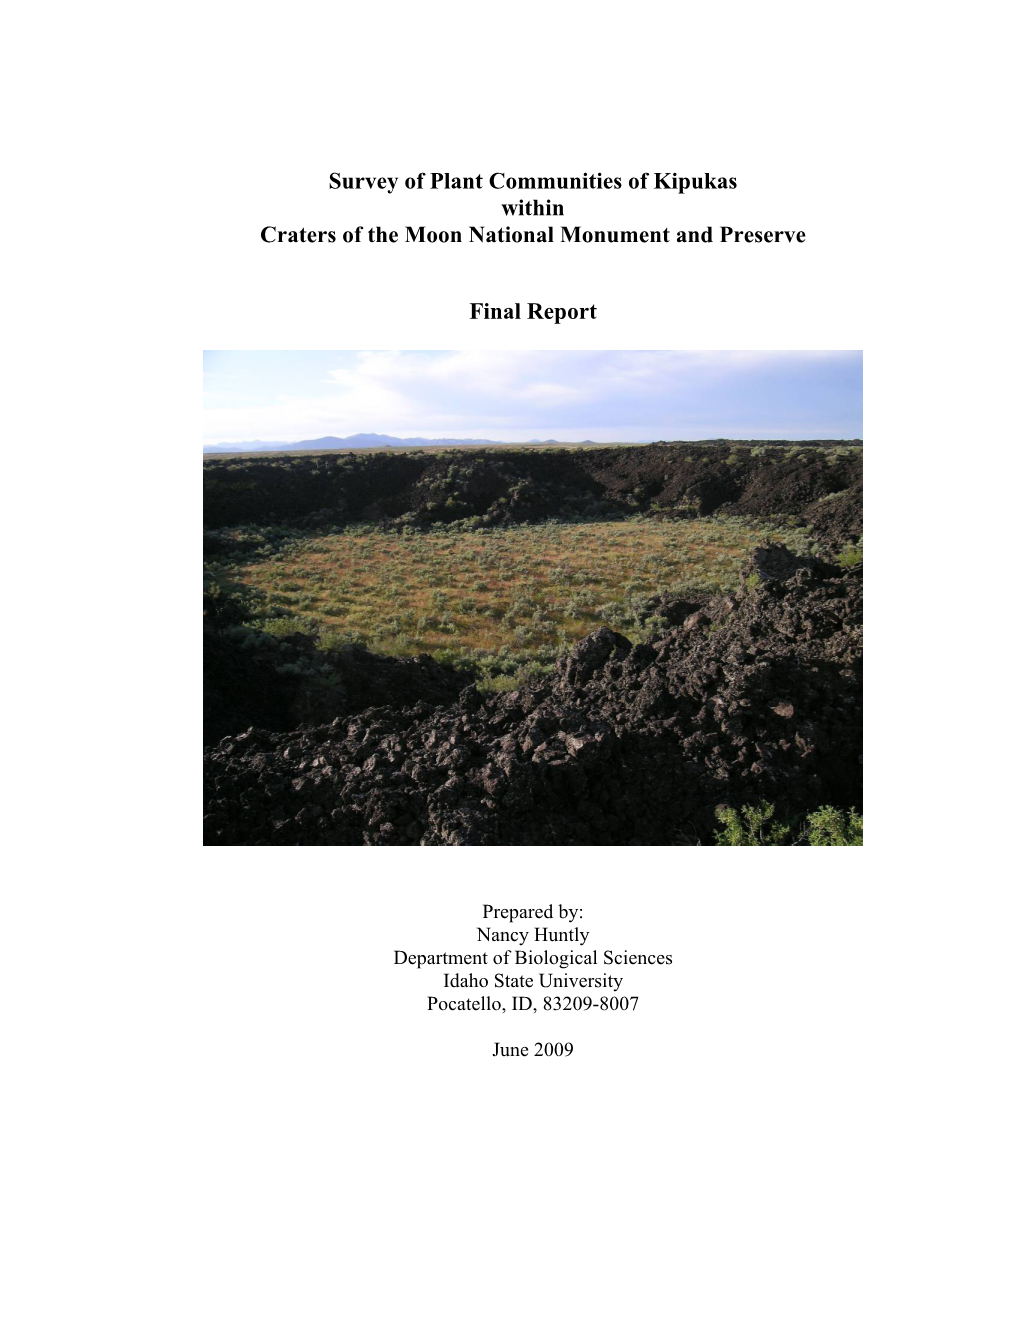 Survey of Plant Communities of Kipukas Within Craters of the Moon National Monument and Preserve